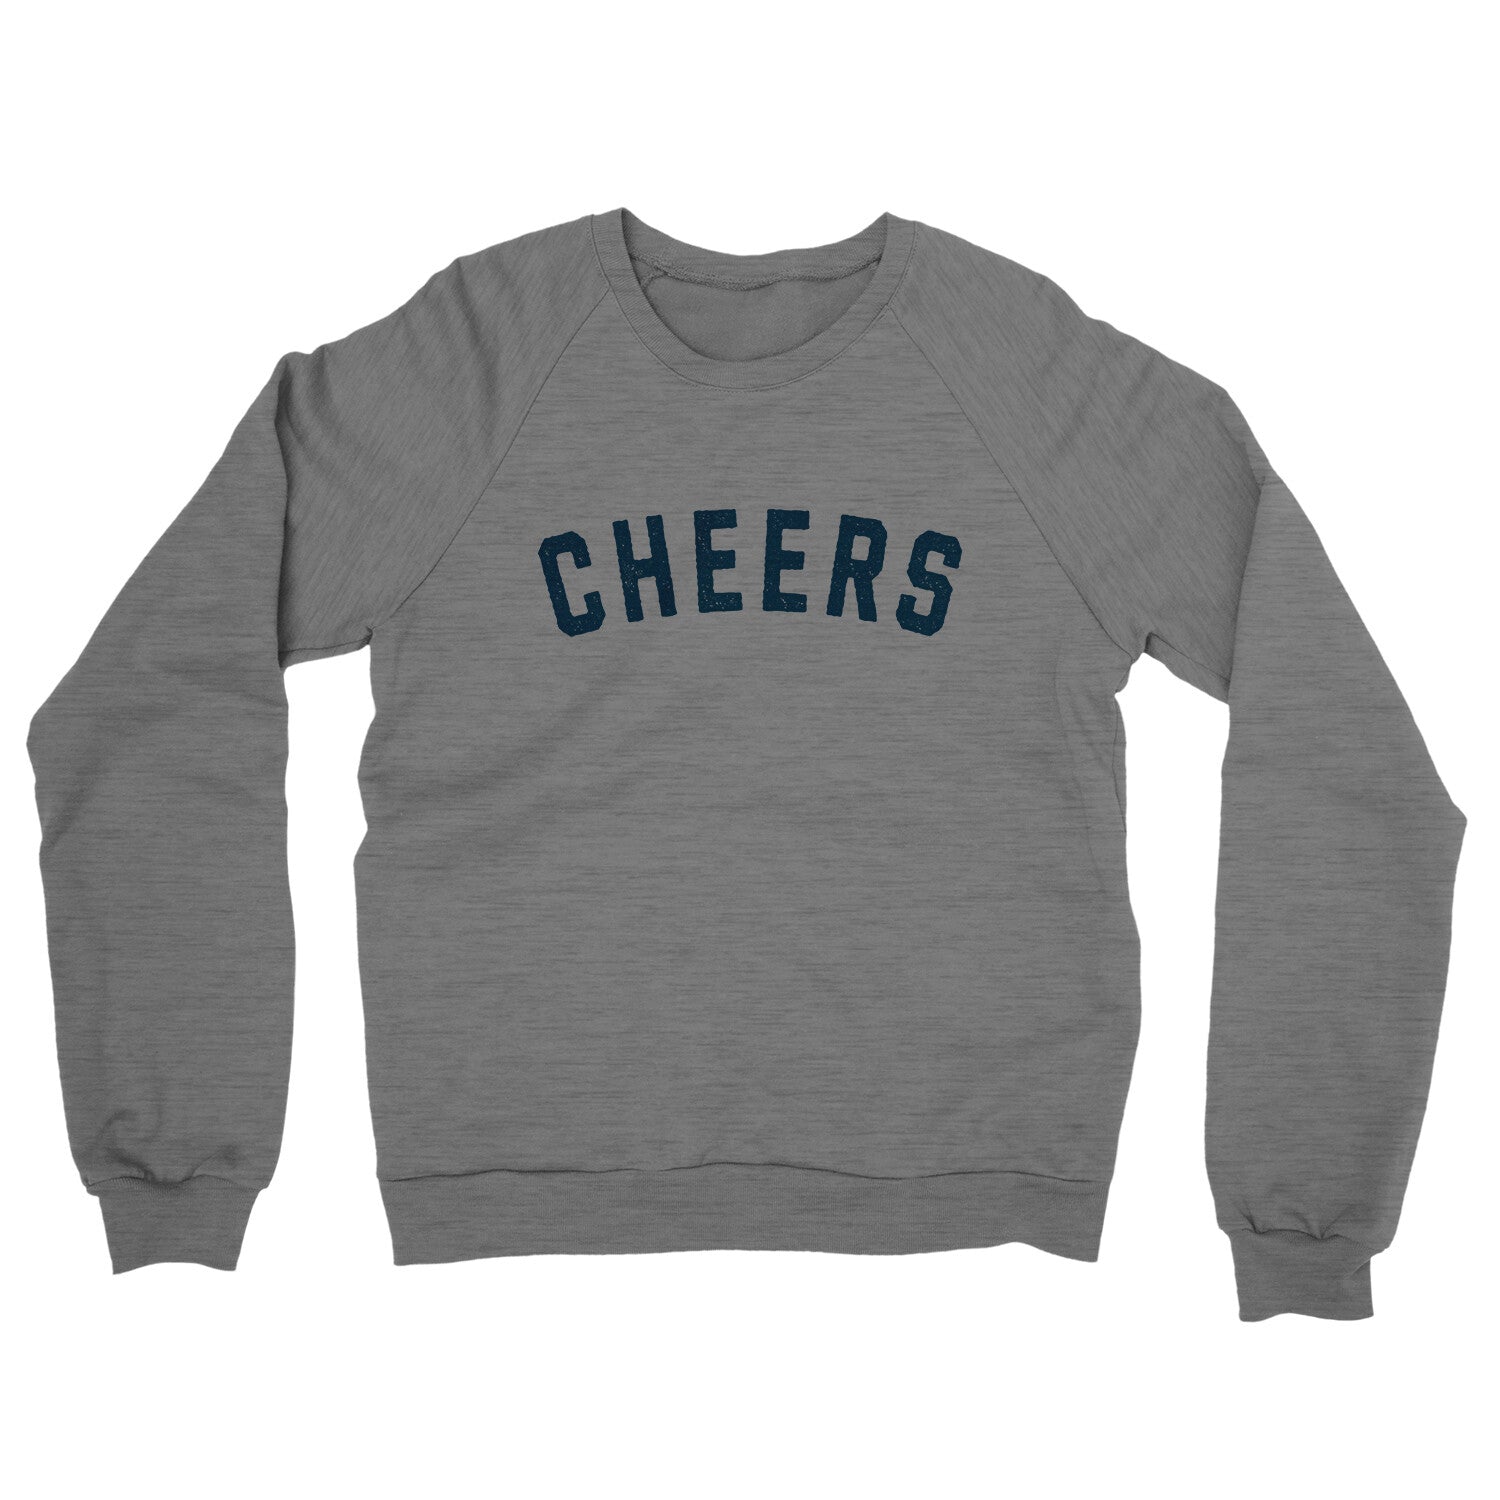 Cheers in Graphite Heather Color